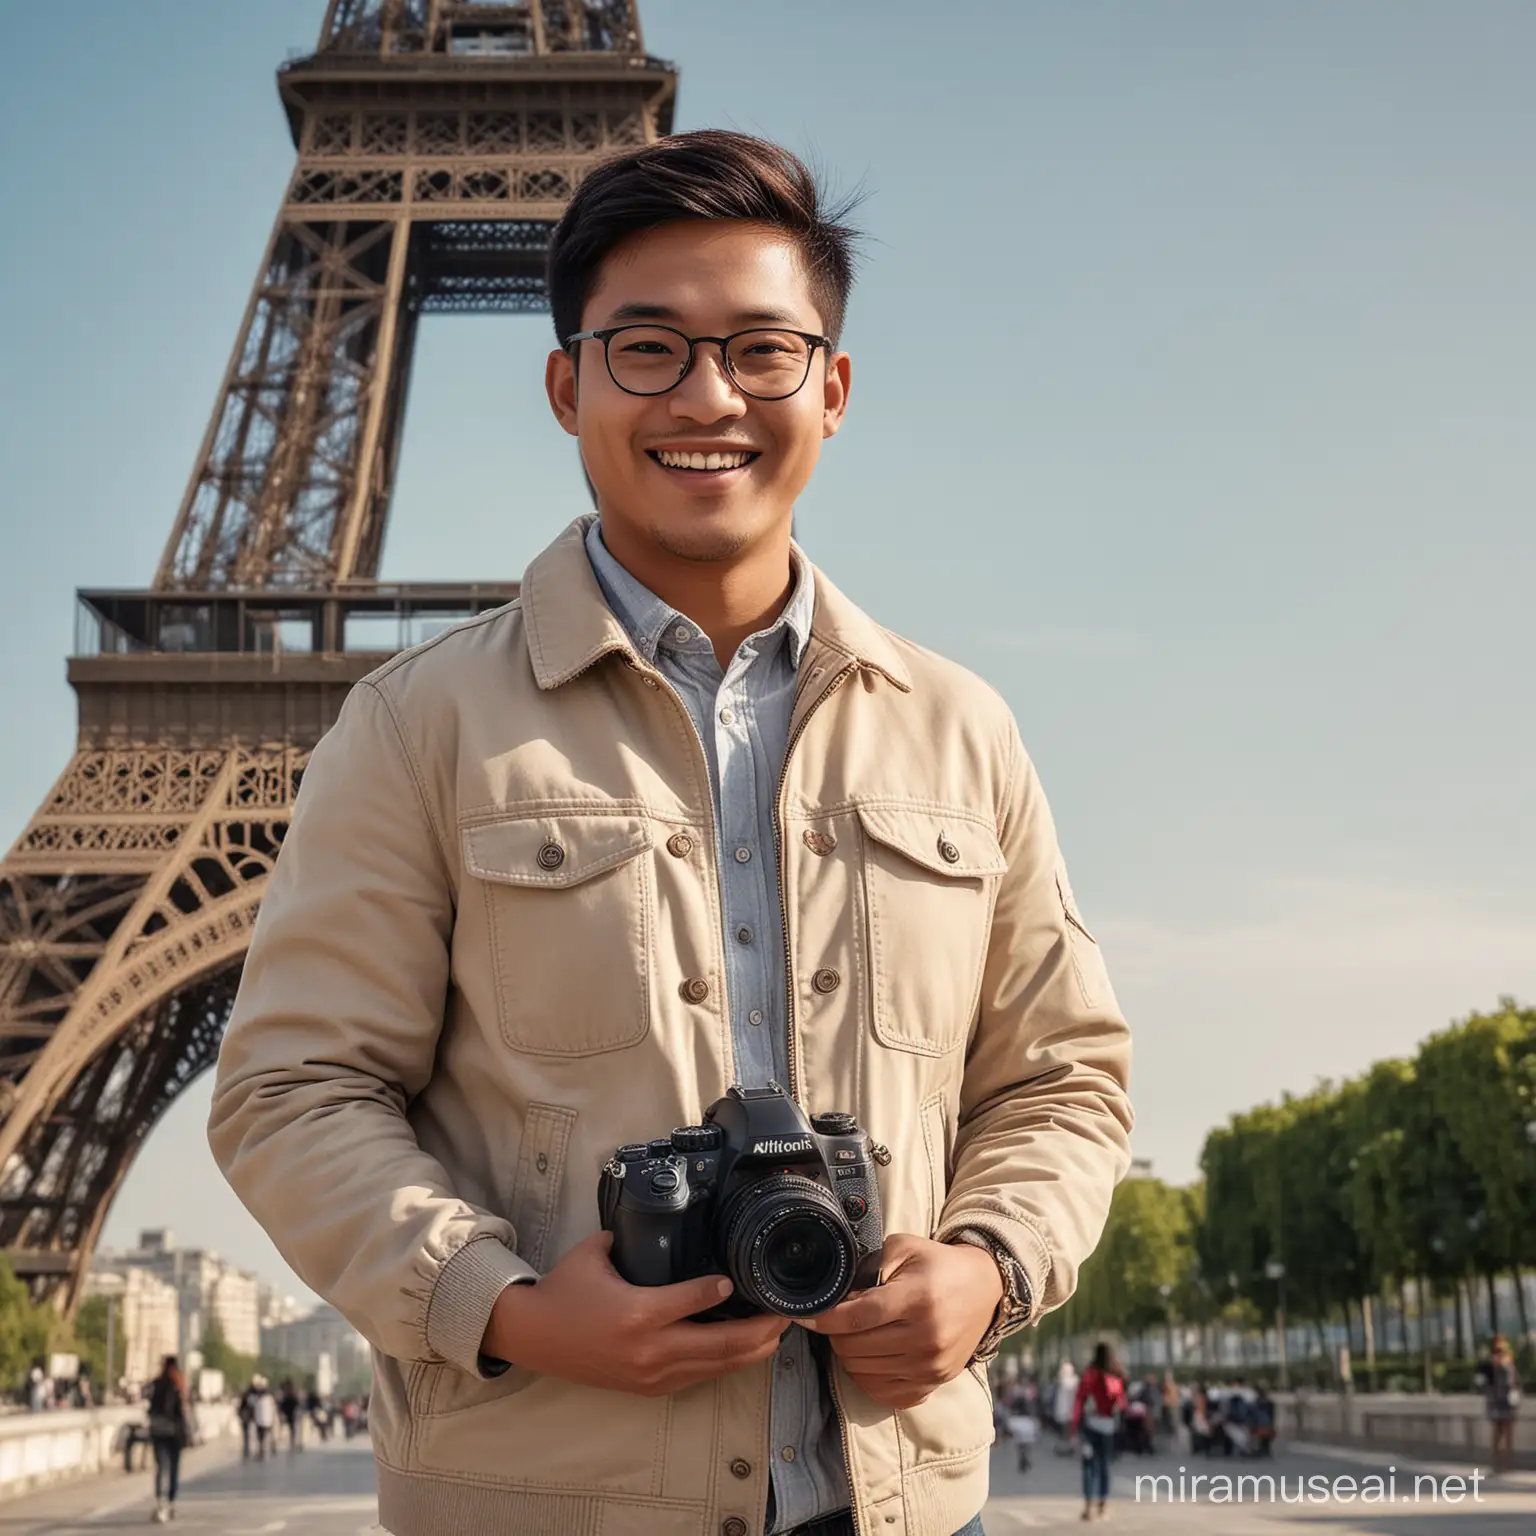 Smiling Indonesian Photographer with DSLR Camera near Eiffel Tower